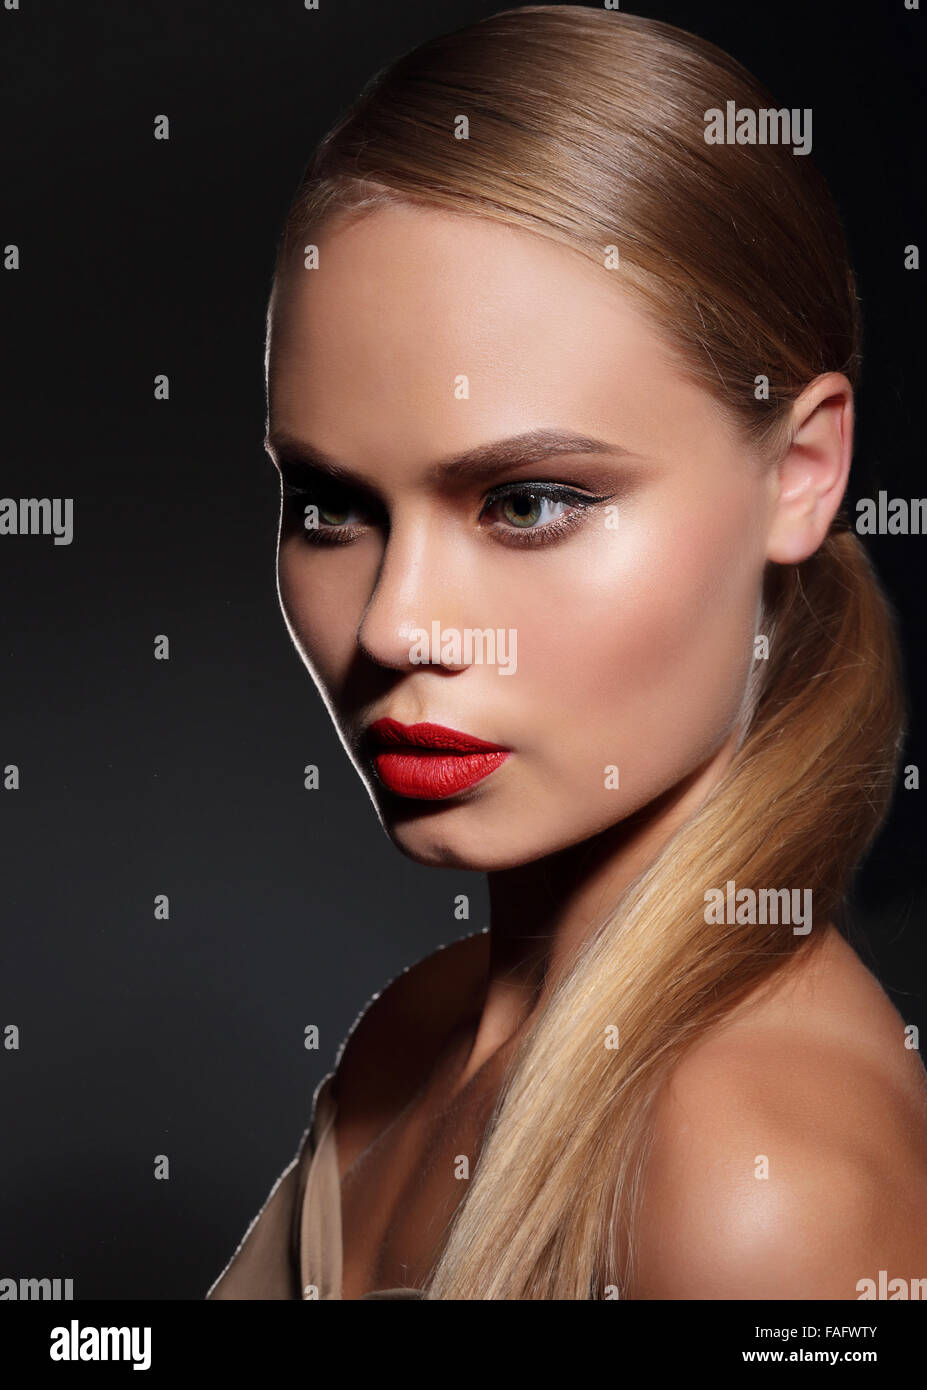 Young woman with straight hair and and red lips on dark background. Portrait. Stock Photo